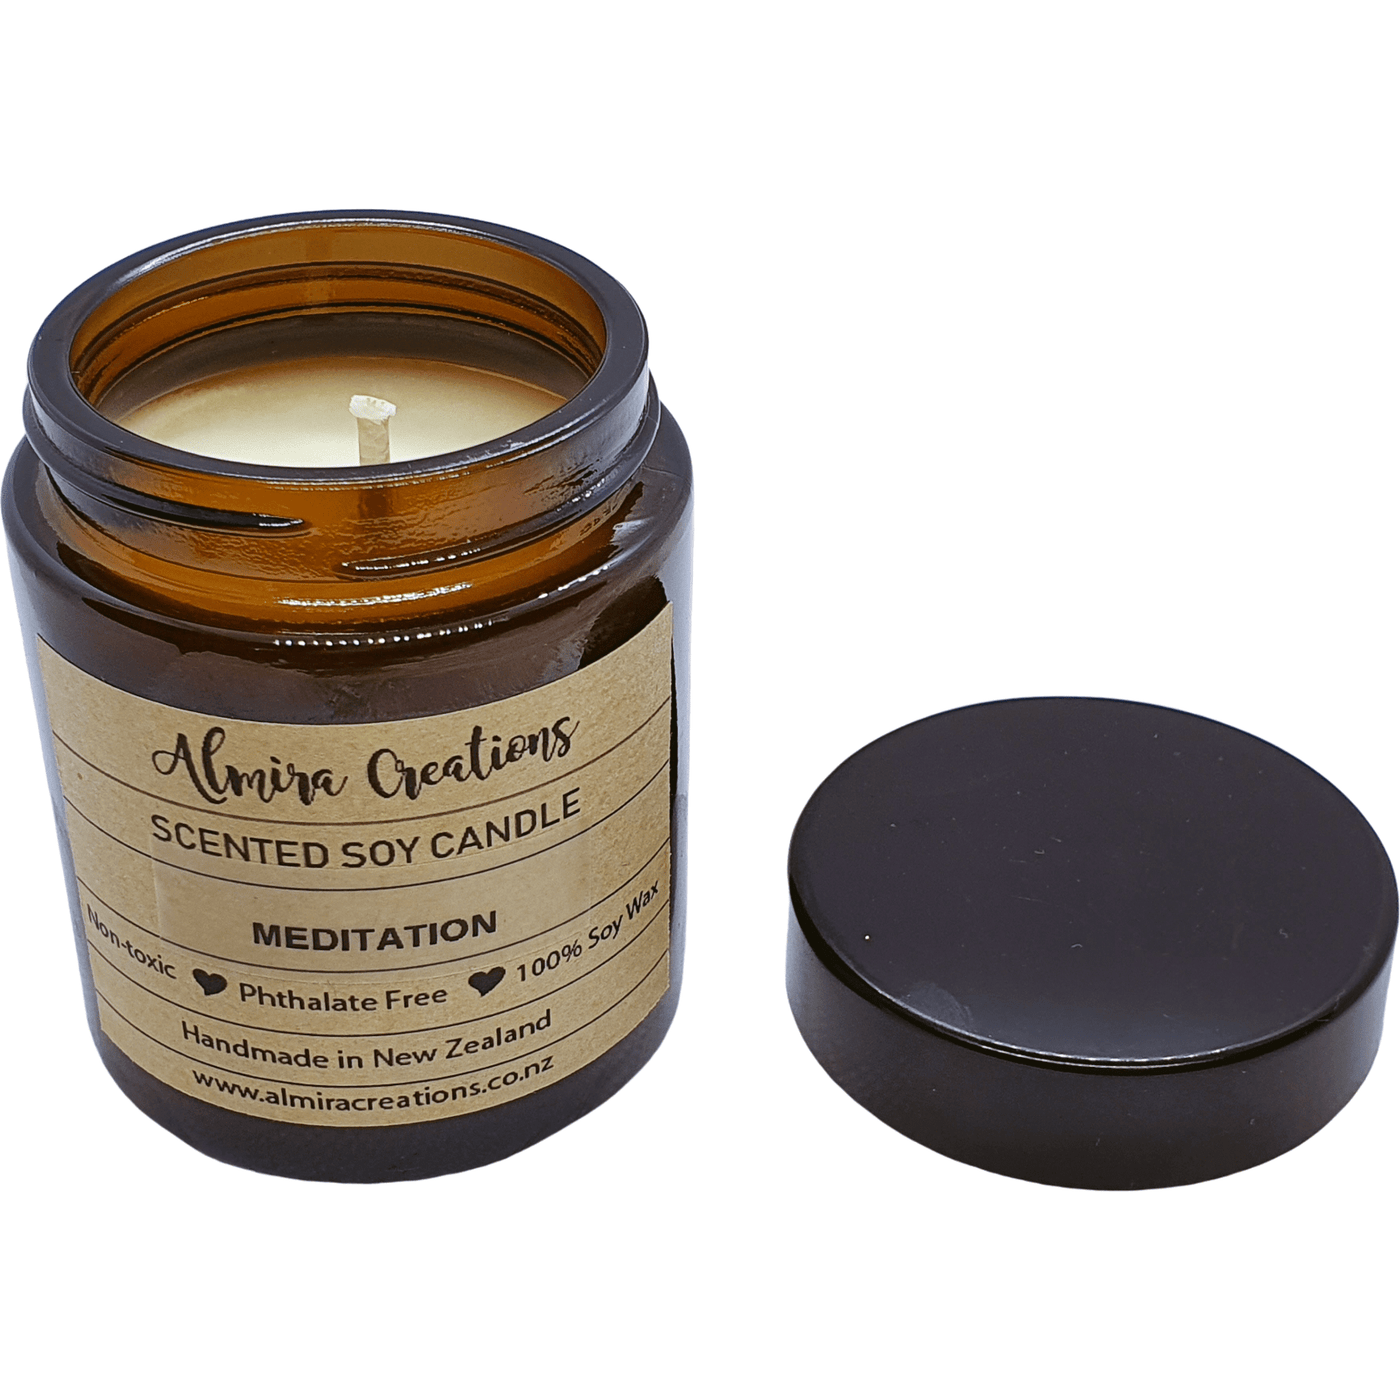 Meditation - Scented Soy Candle - Almira Creations